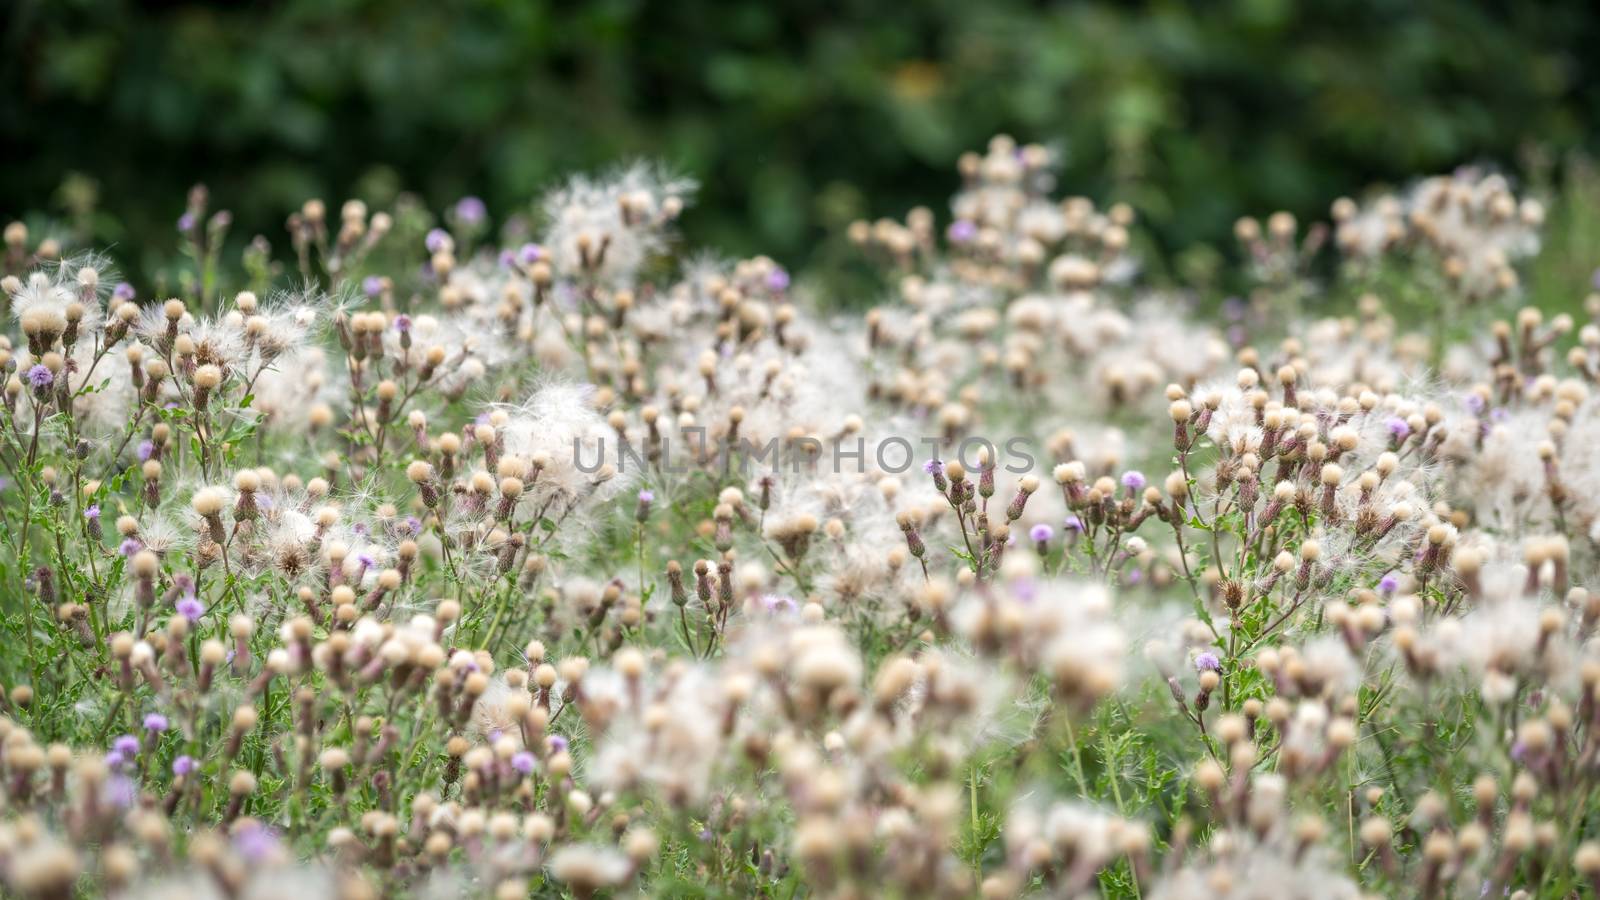 Masses of seeds being produced by Melancholy Thistles (Cirsium heterophyllum)